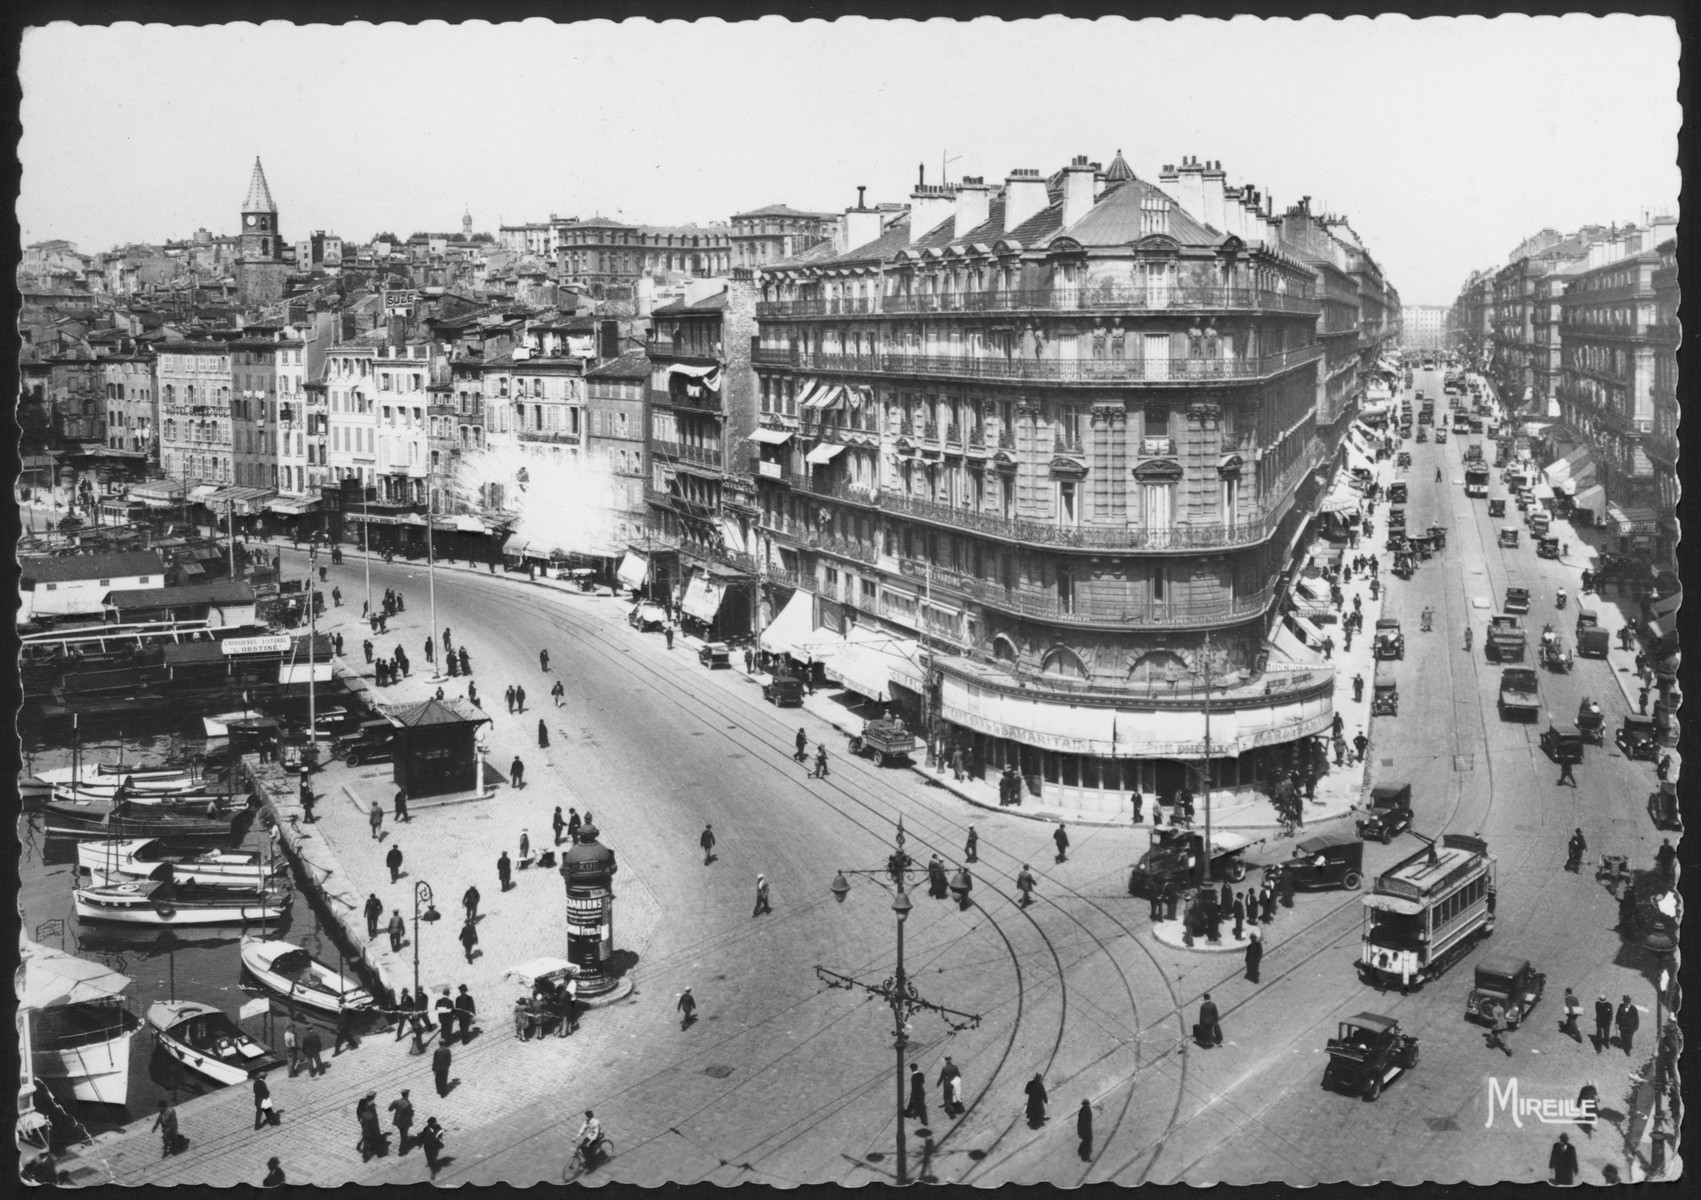 Postcard showing a view of a major intersection in Marseilles, France.